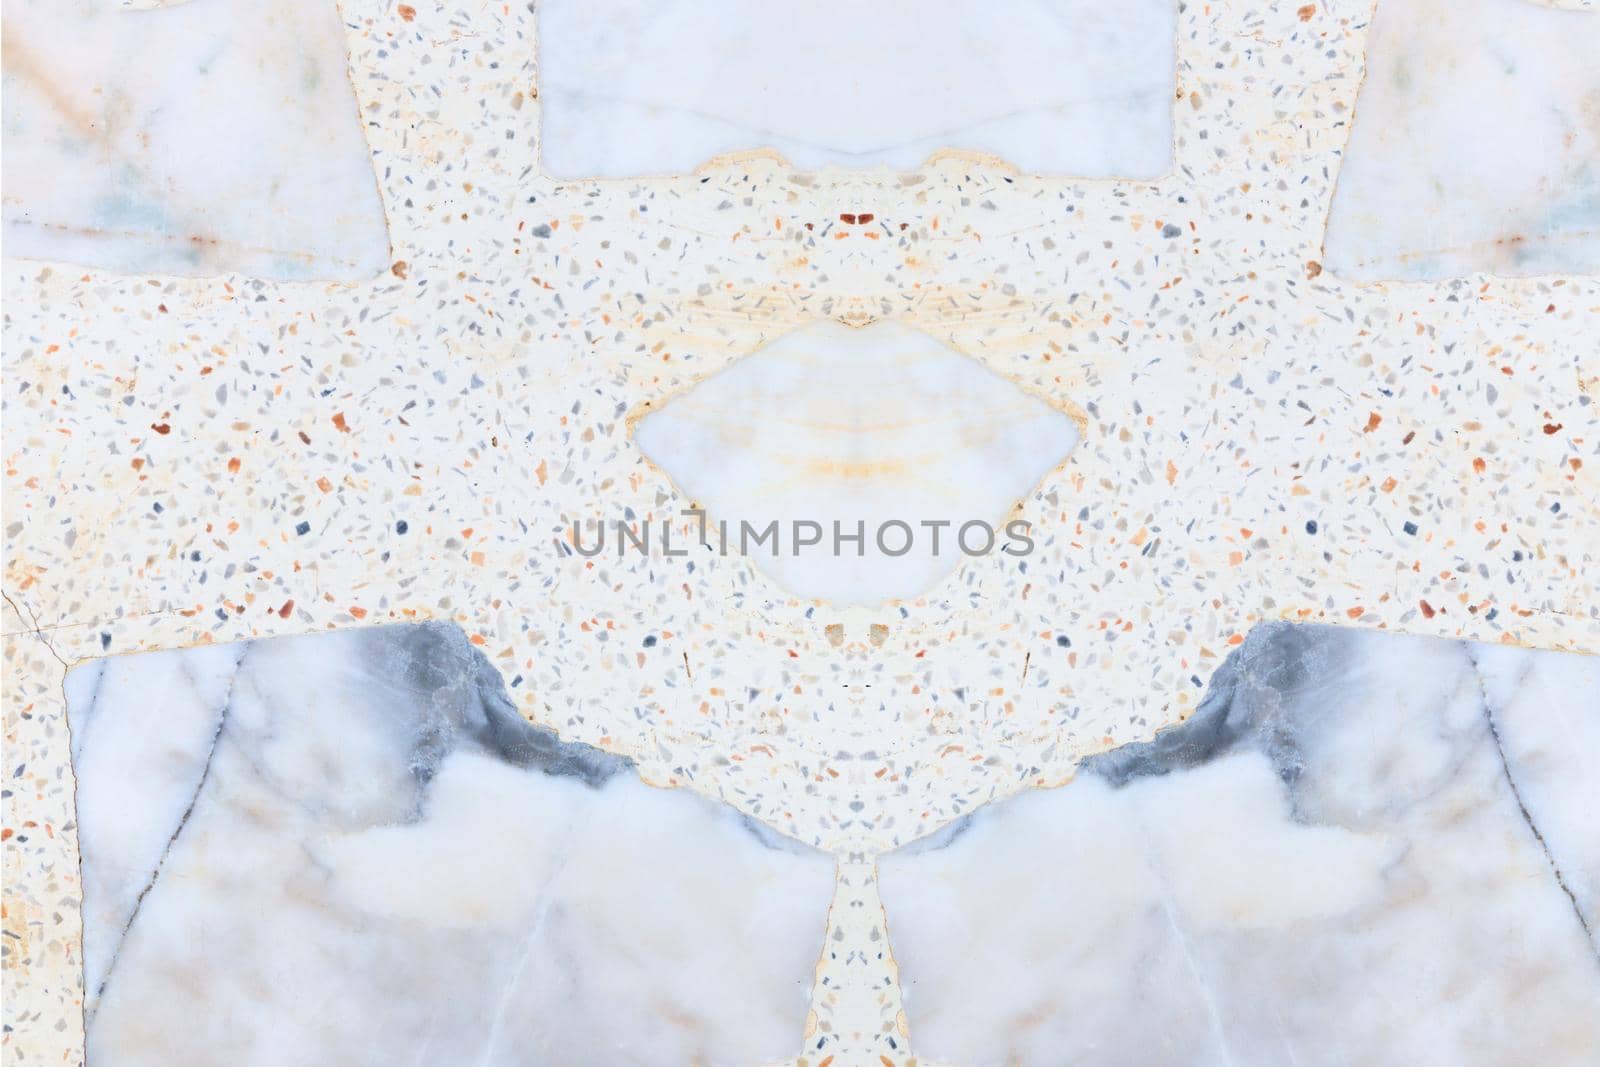 terrazzo flooring or polished stone pattern wall and color surface marble vintage texture old for background image horizontal